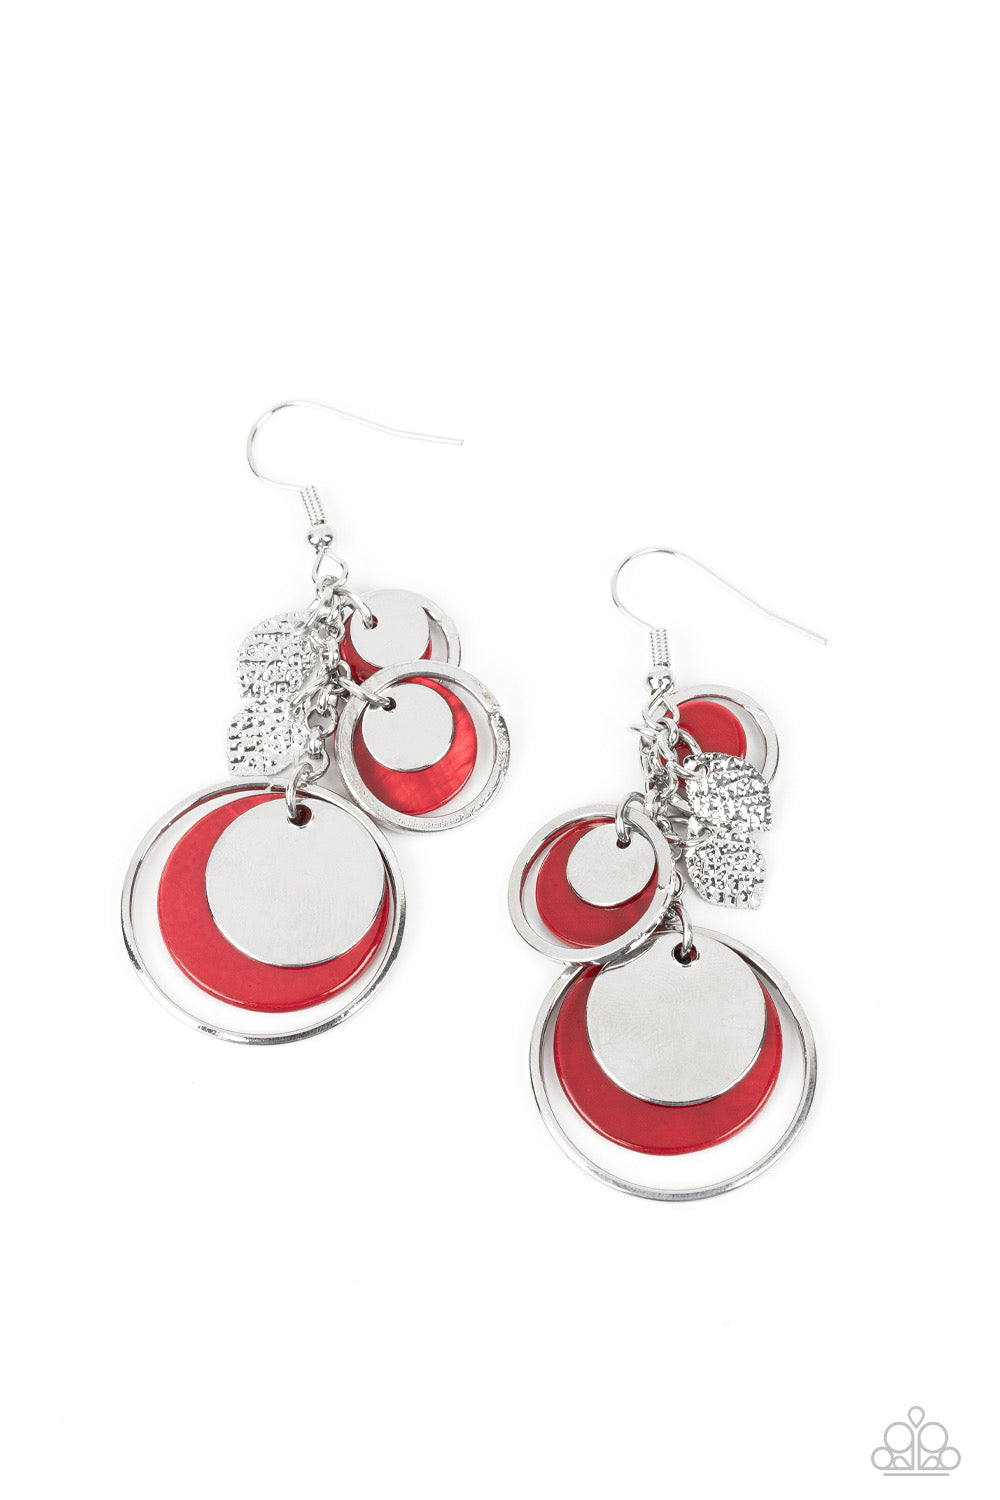 Silver Dangle Earrings - Paparazzi Saved by the SHELL - Red Earrings Paparazzi jewelry image